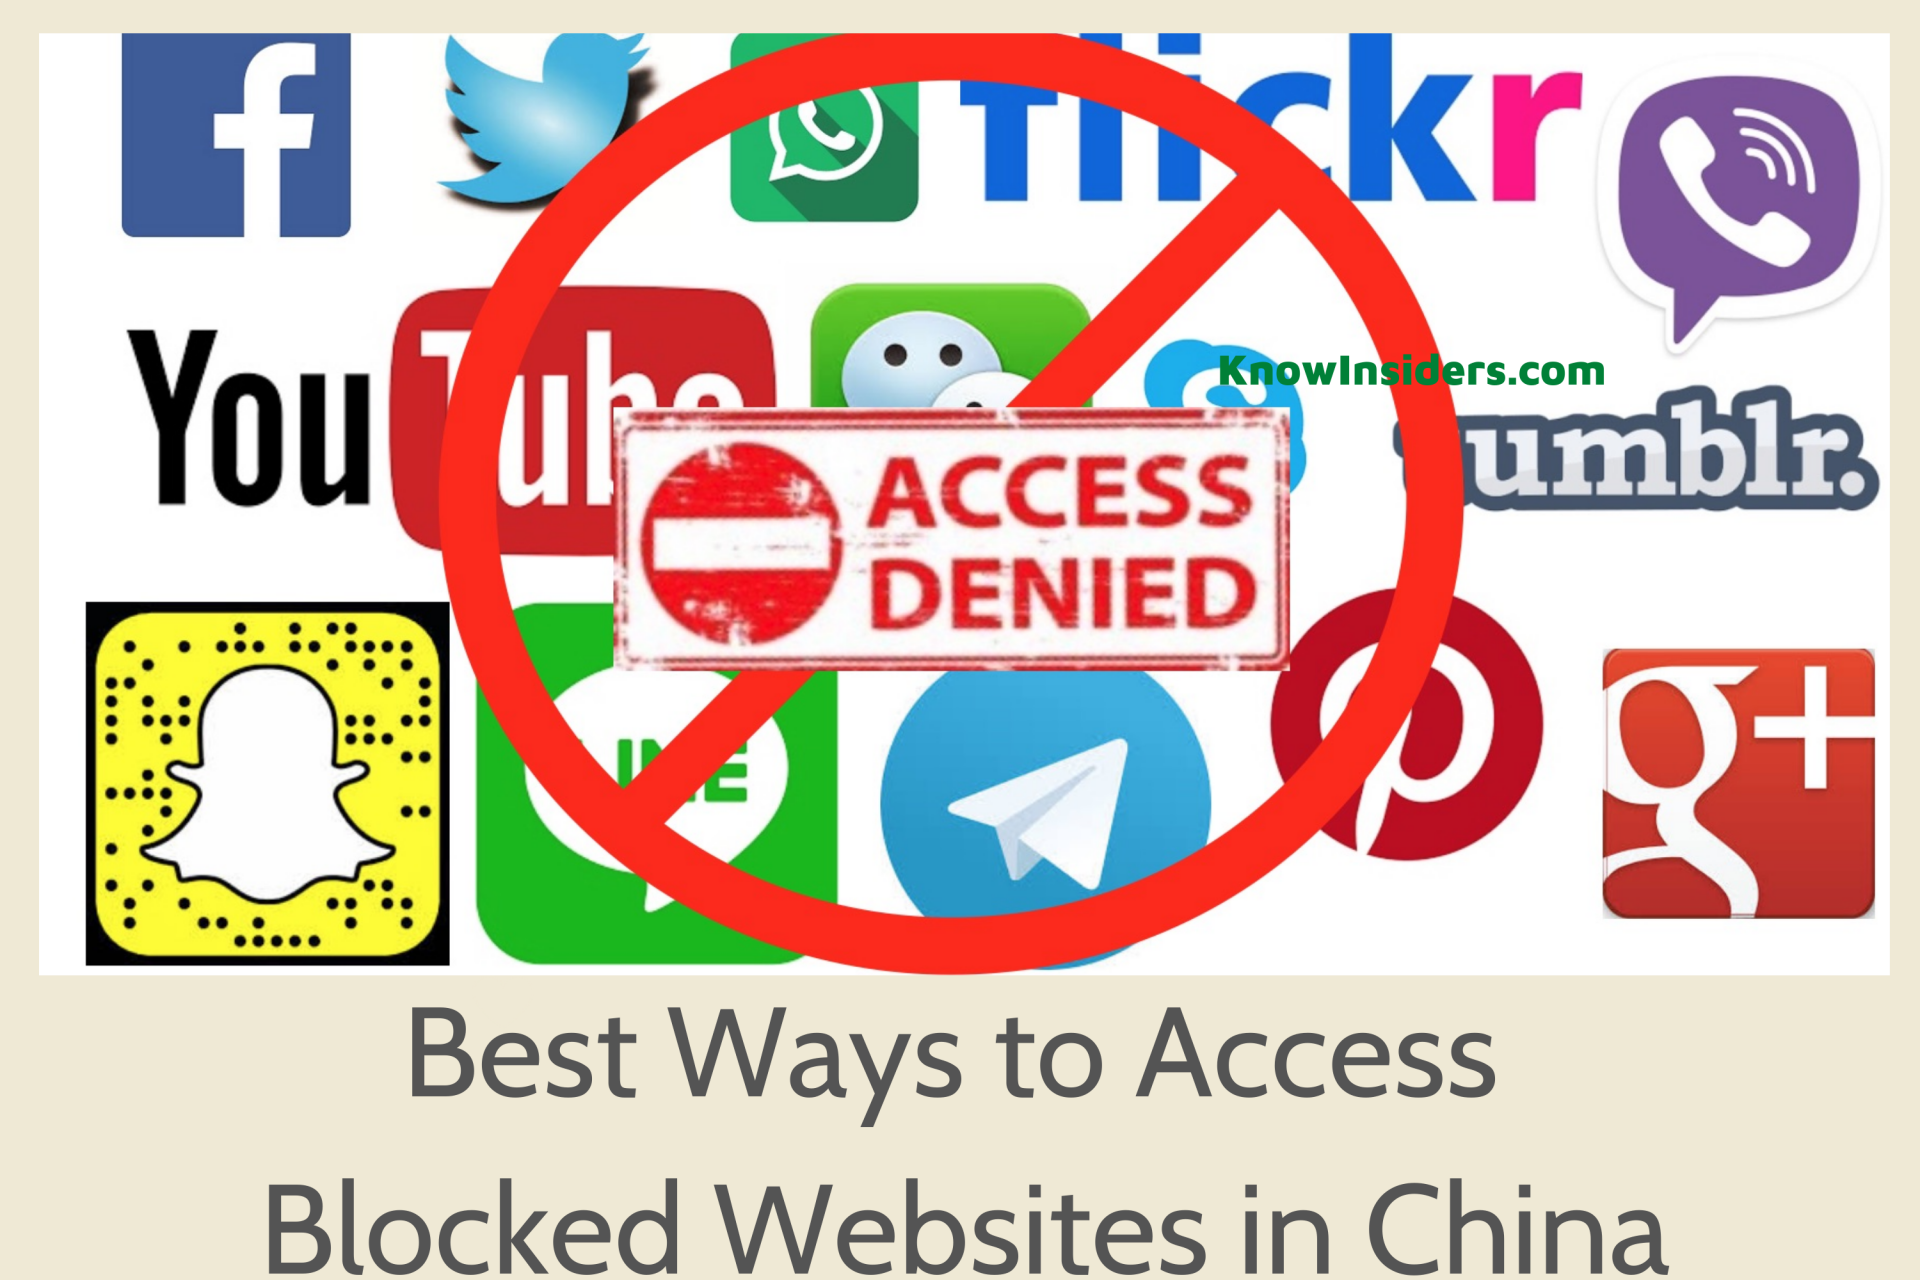 Simple Ways to Access Blocked Websites in China